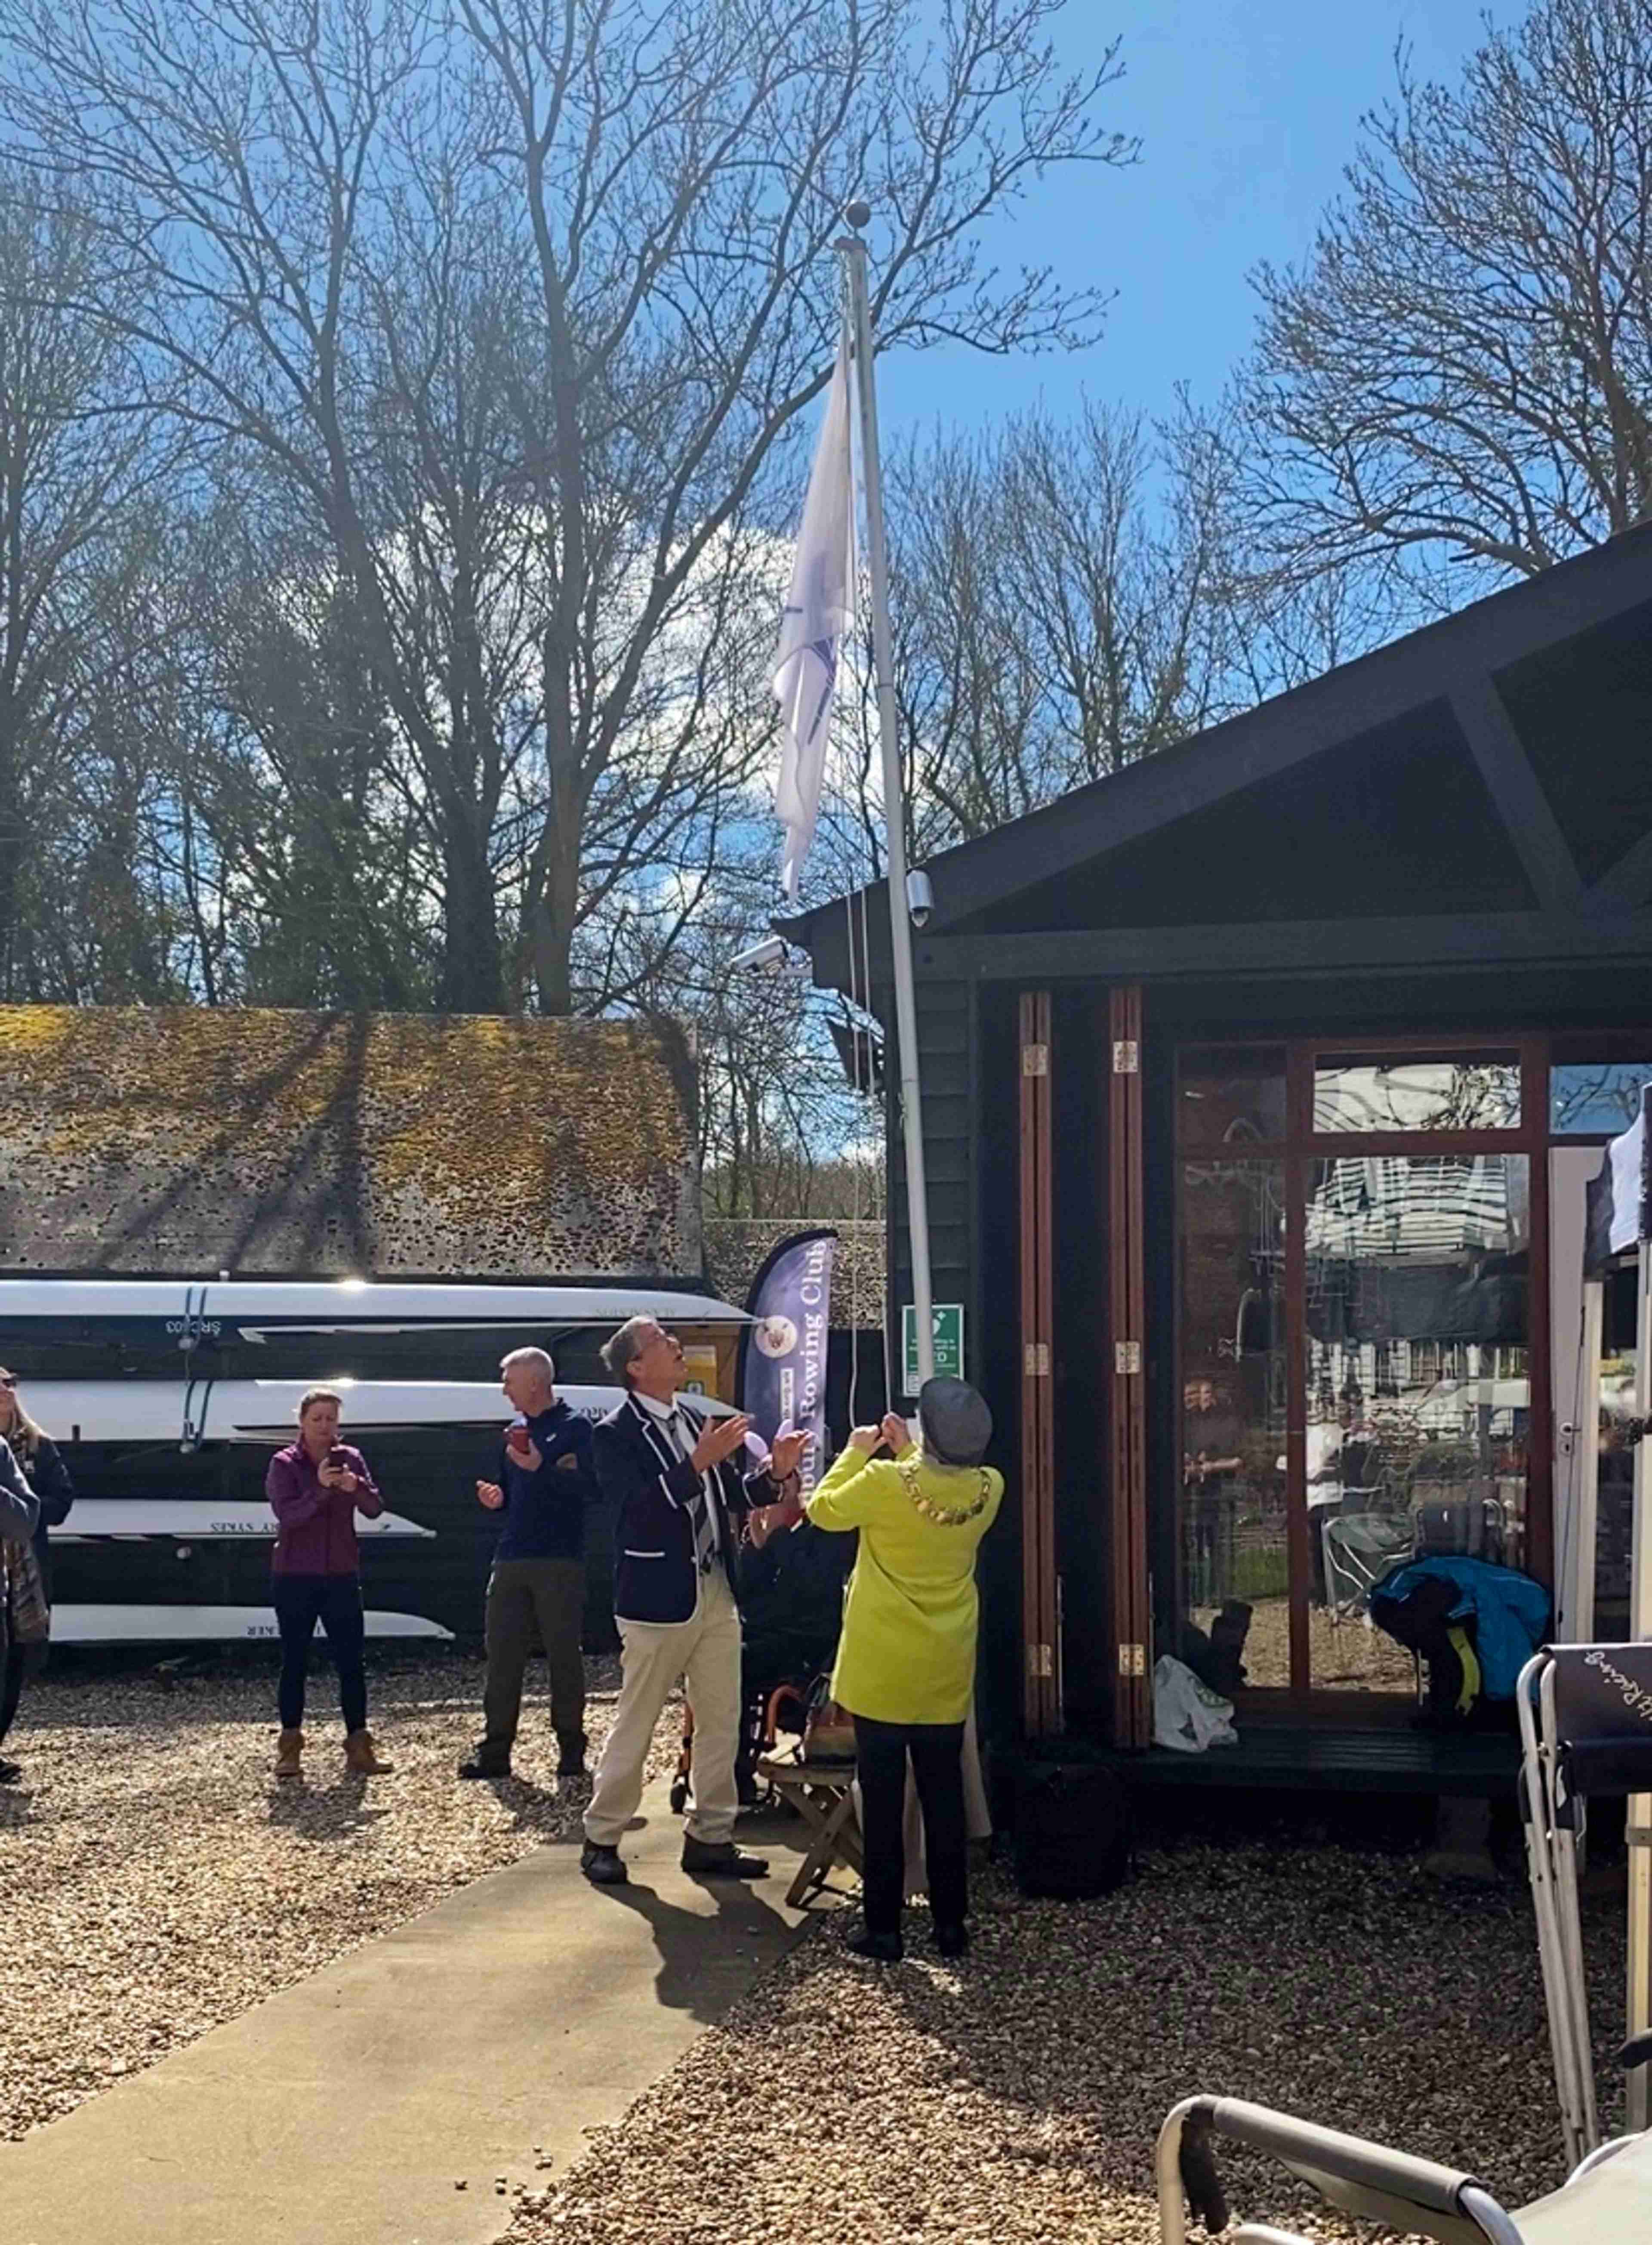 A small group of people standing on the gravel outside the clubhouse, watching as the lady mayor (who wears a distinctive, long yellow coat) raises the club flag up the pole. Andrew is standing very close to the pole, looking at the flag, palms outsretched and mouth agog in genuine wonder.